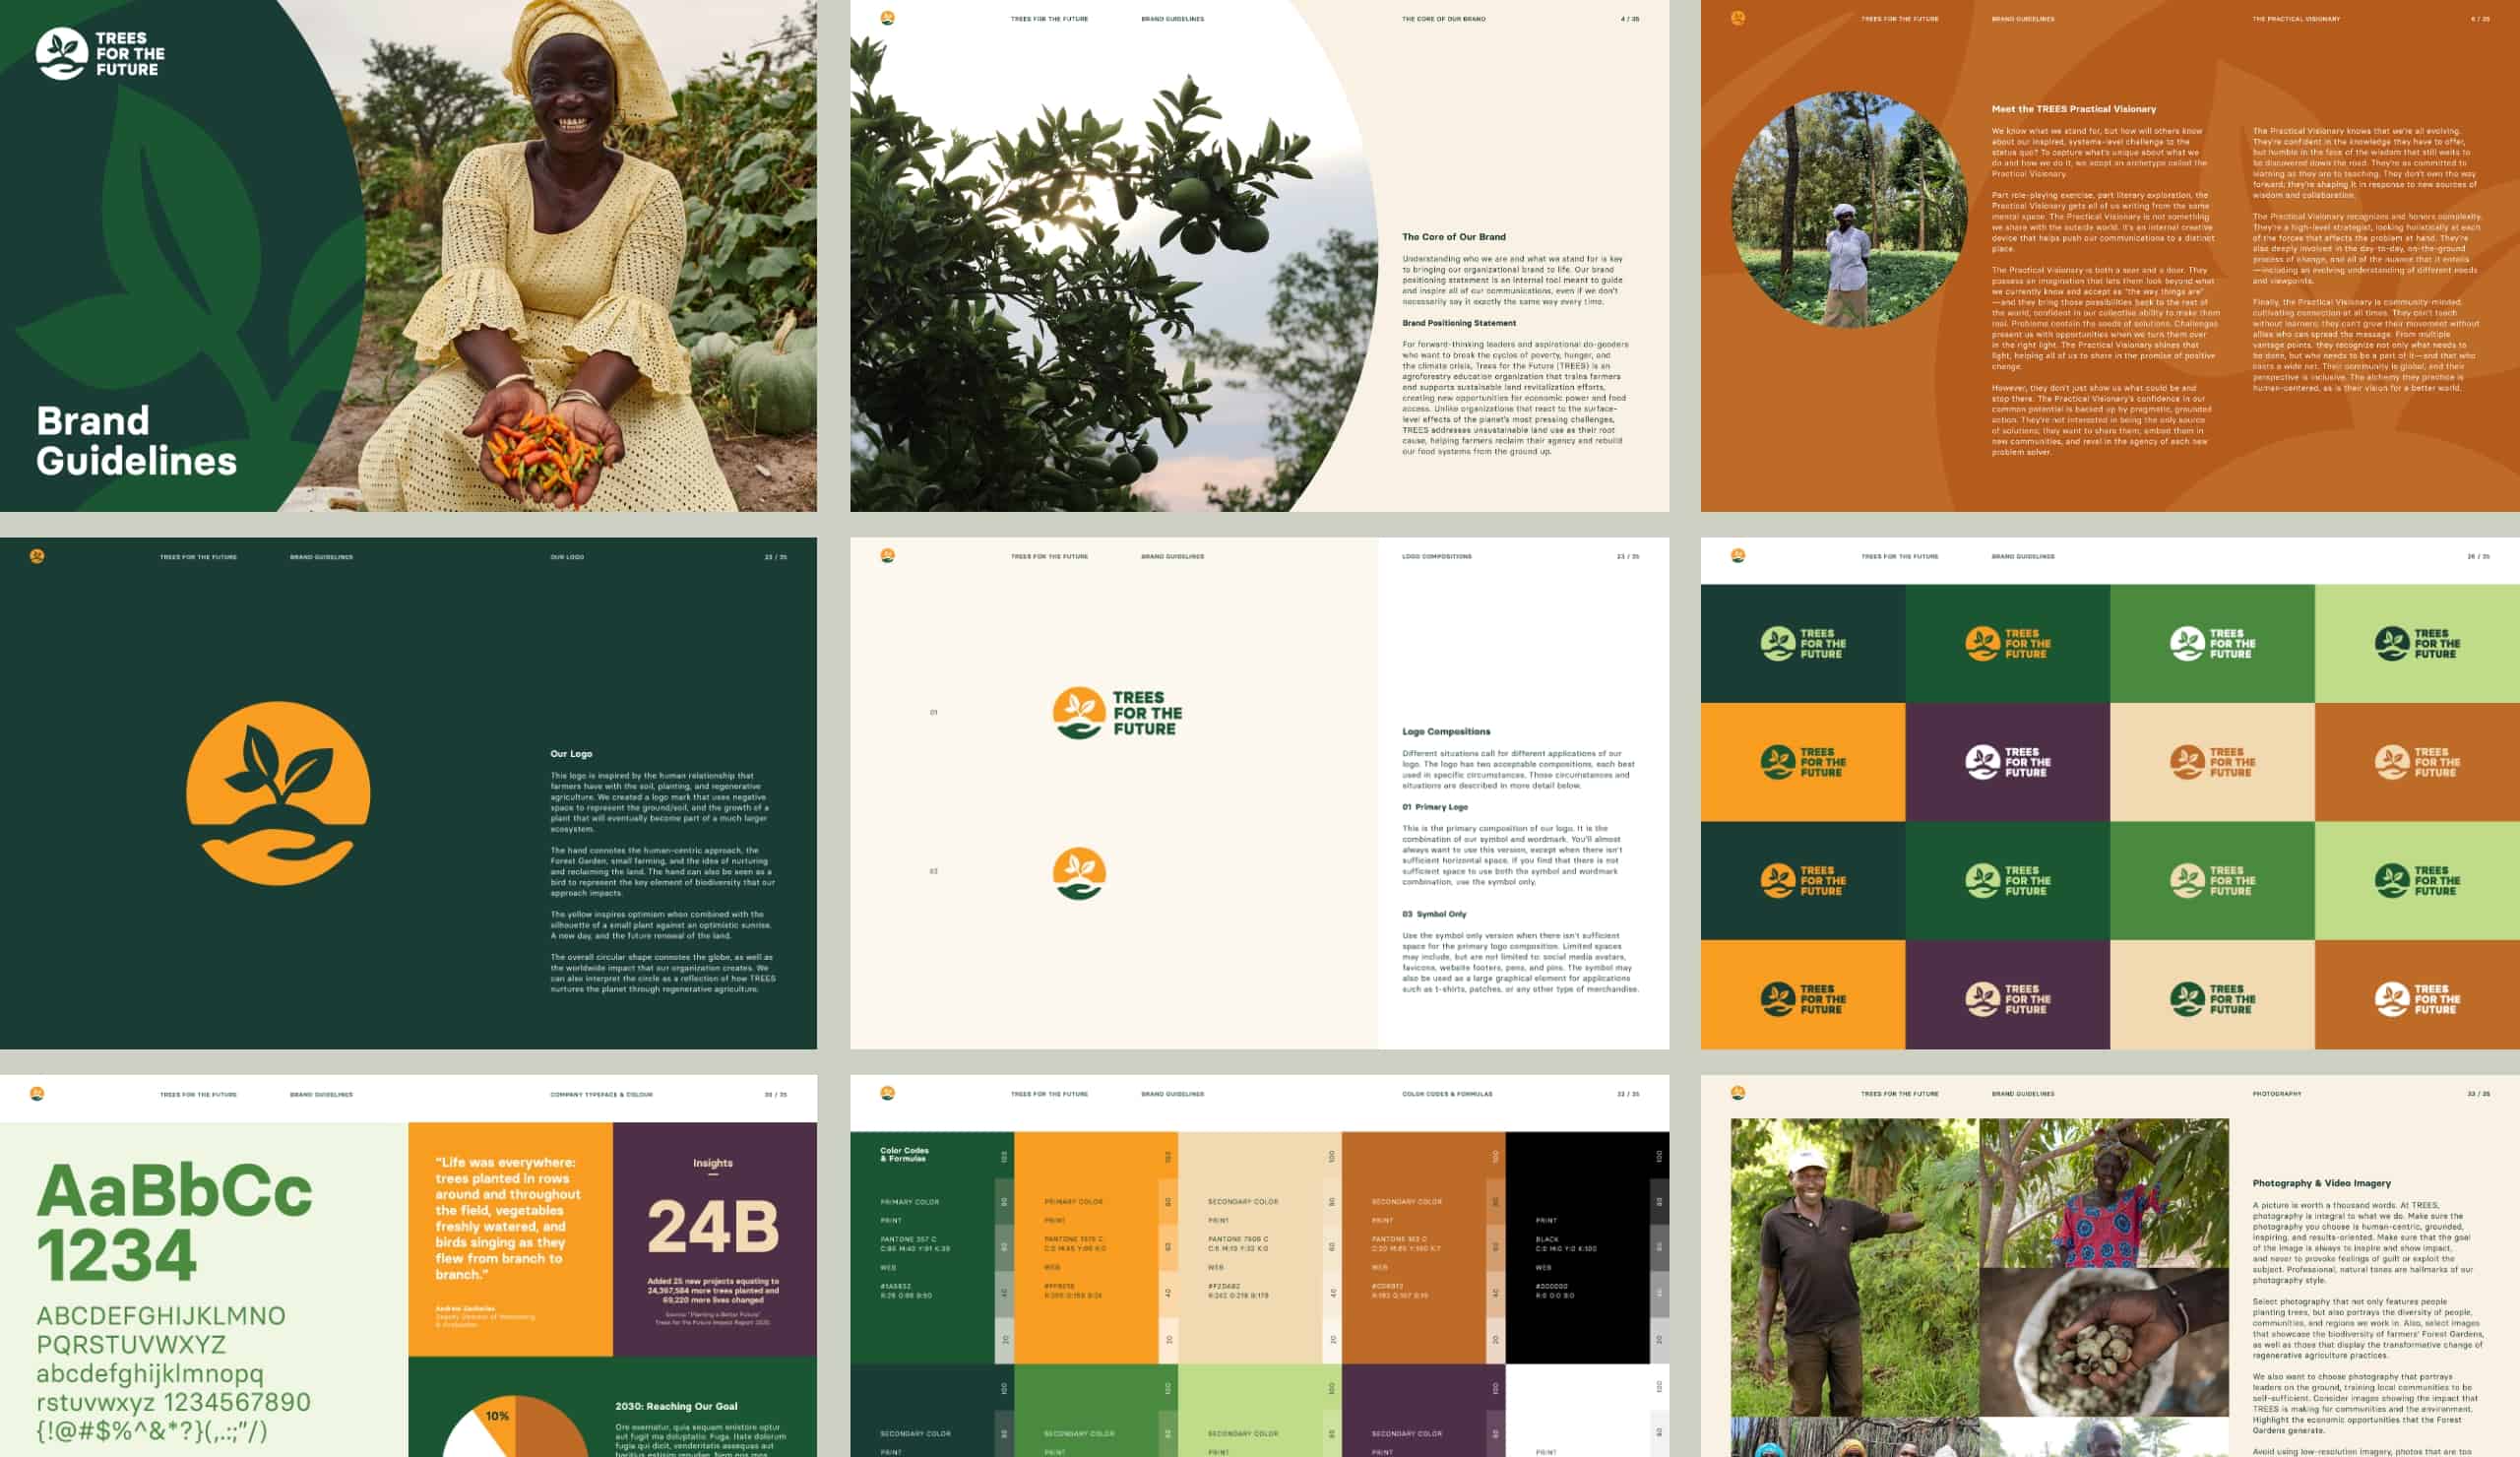 graphic detail snapshots of trees' brand guidelines